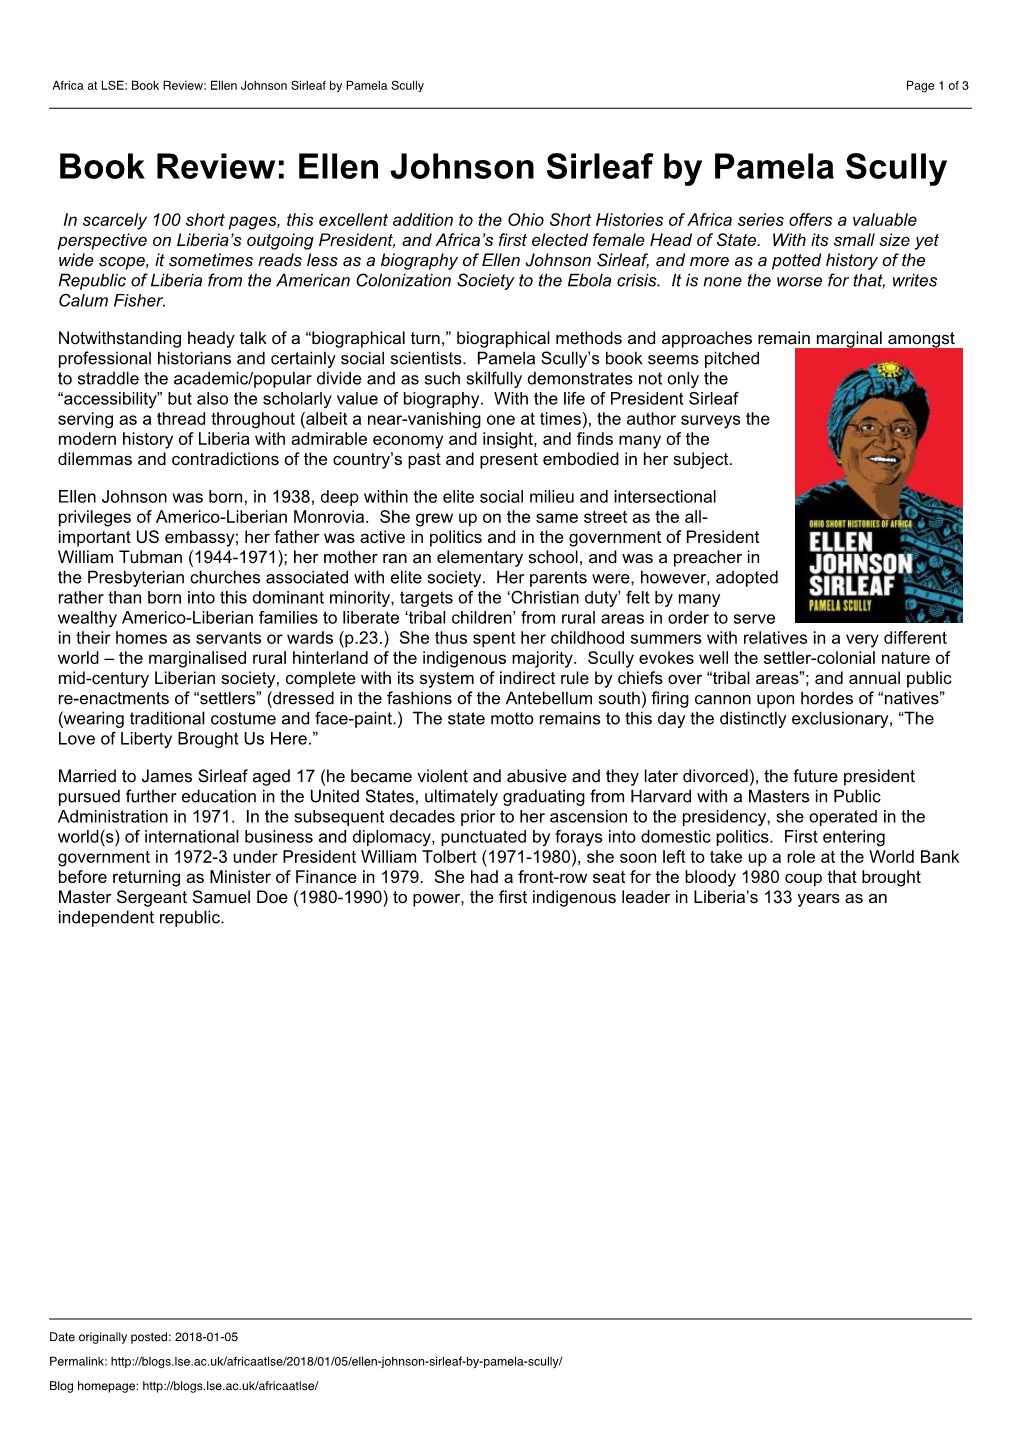 Africa at LSE: Book Review: Ellen Johnson Sirleaf by Pamela Scully Page 1 of 3